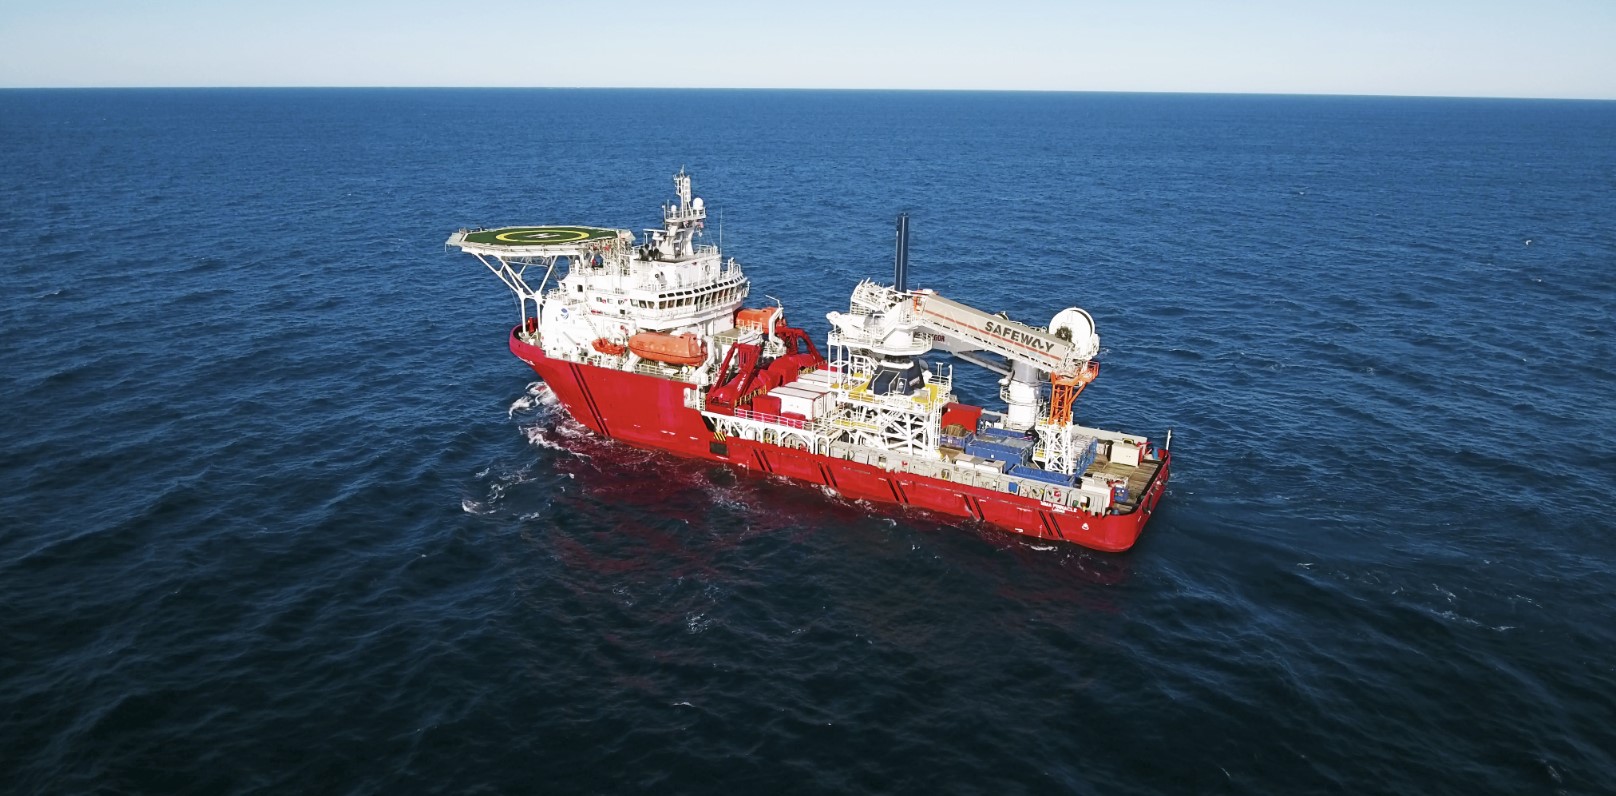 'Strong demand' for MMA’s vessels and subsea services from both oil & gas and offshore wind